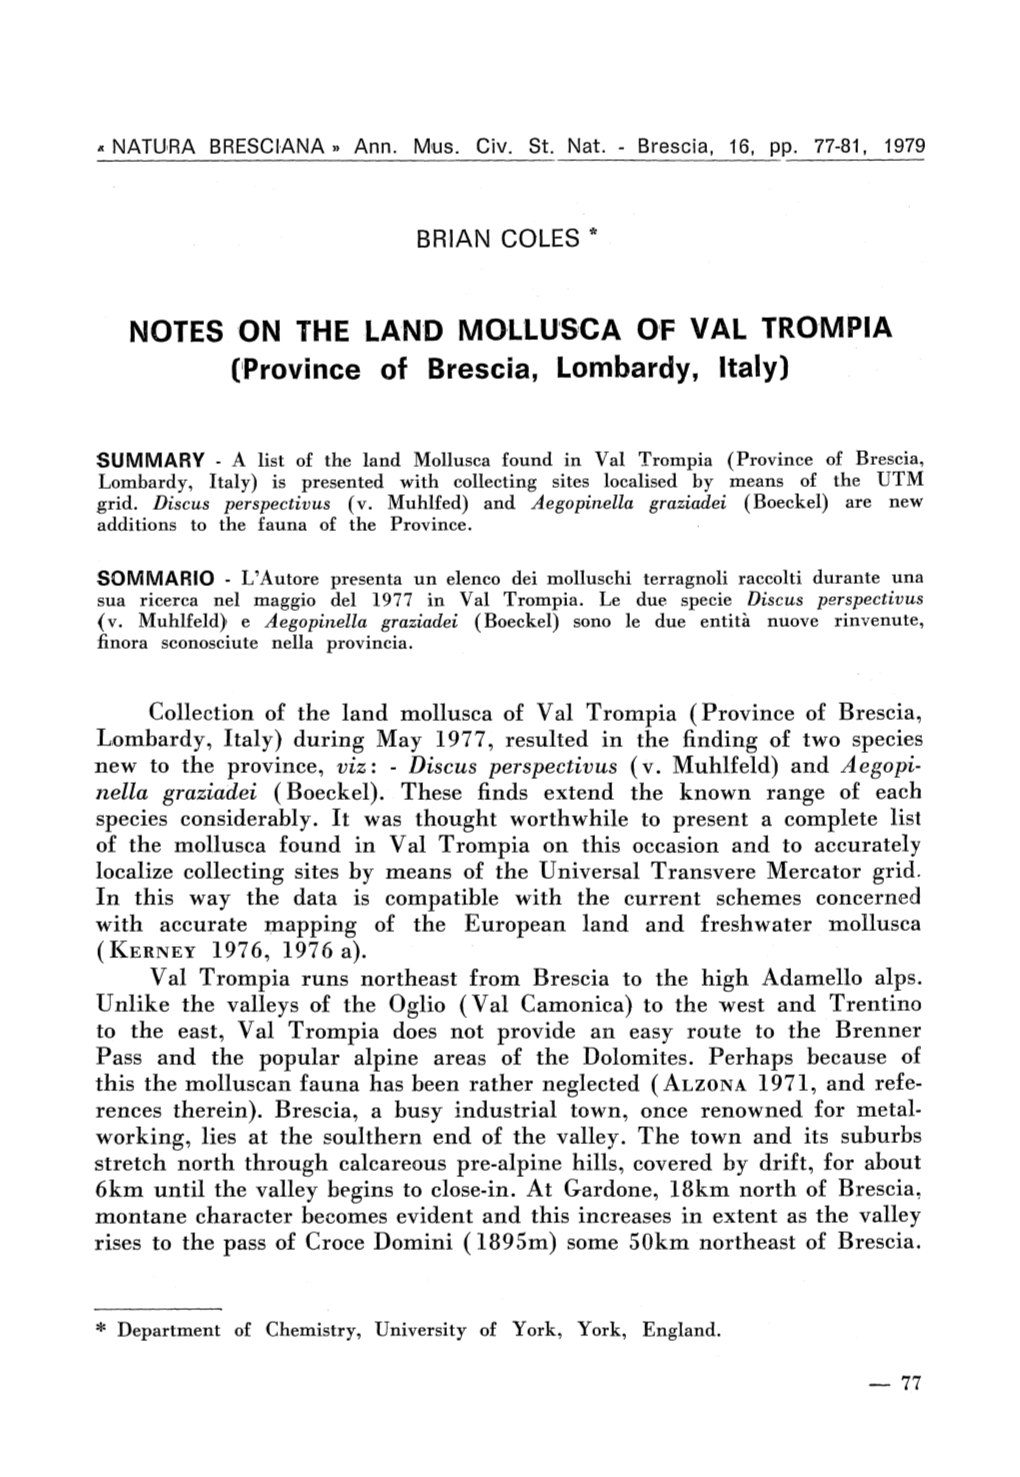 NOTES on the LAND MOLLU'sca of VAL TROMPIA ('Province of Brescia, Lombardy, Ltaly)